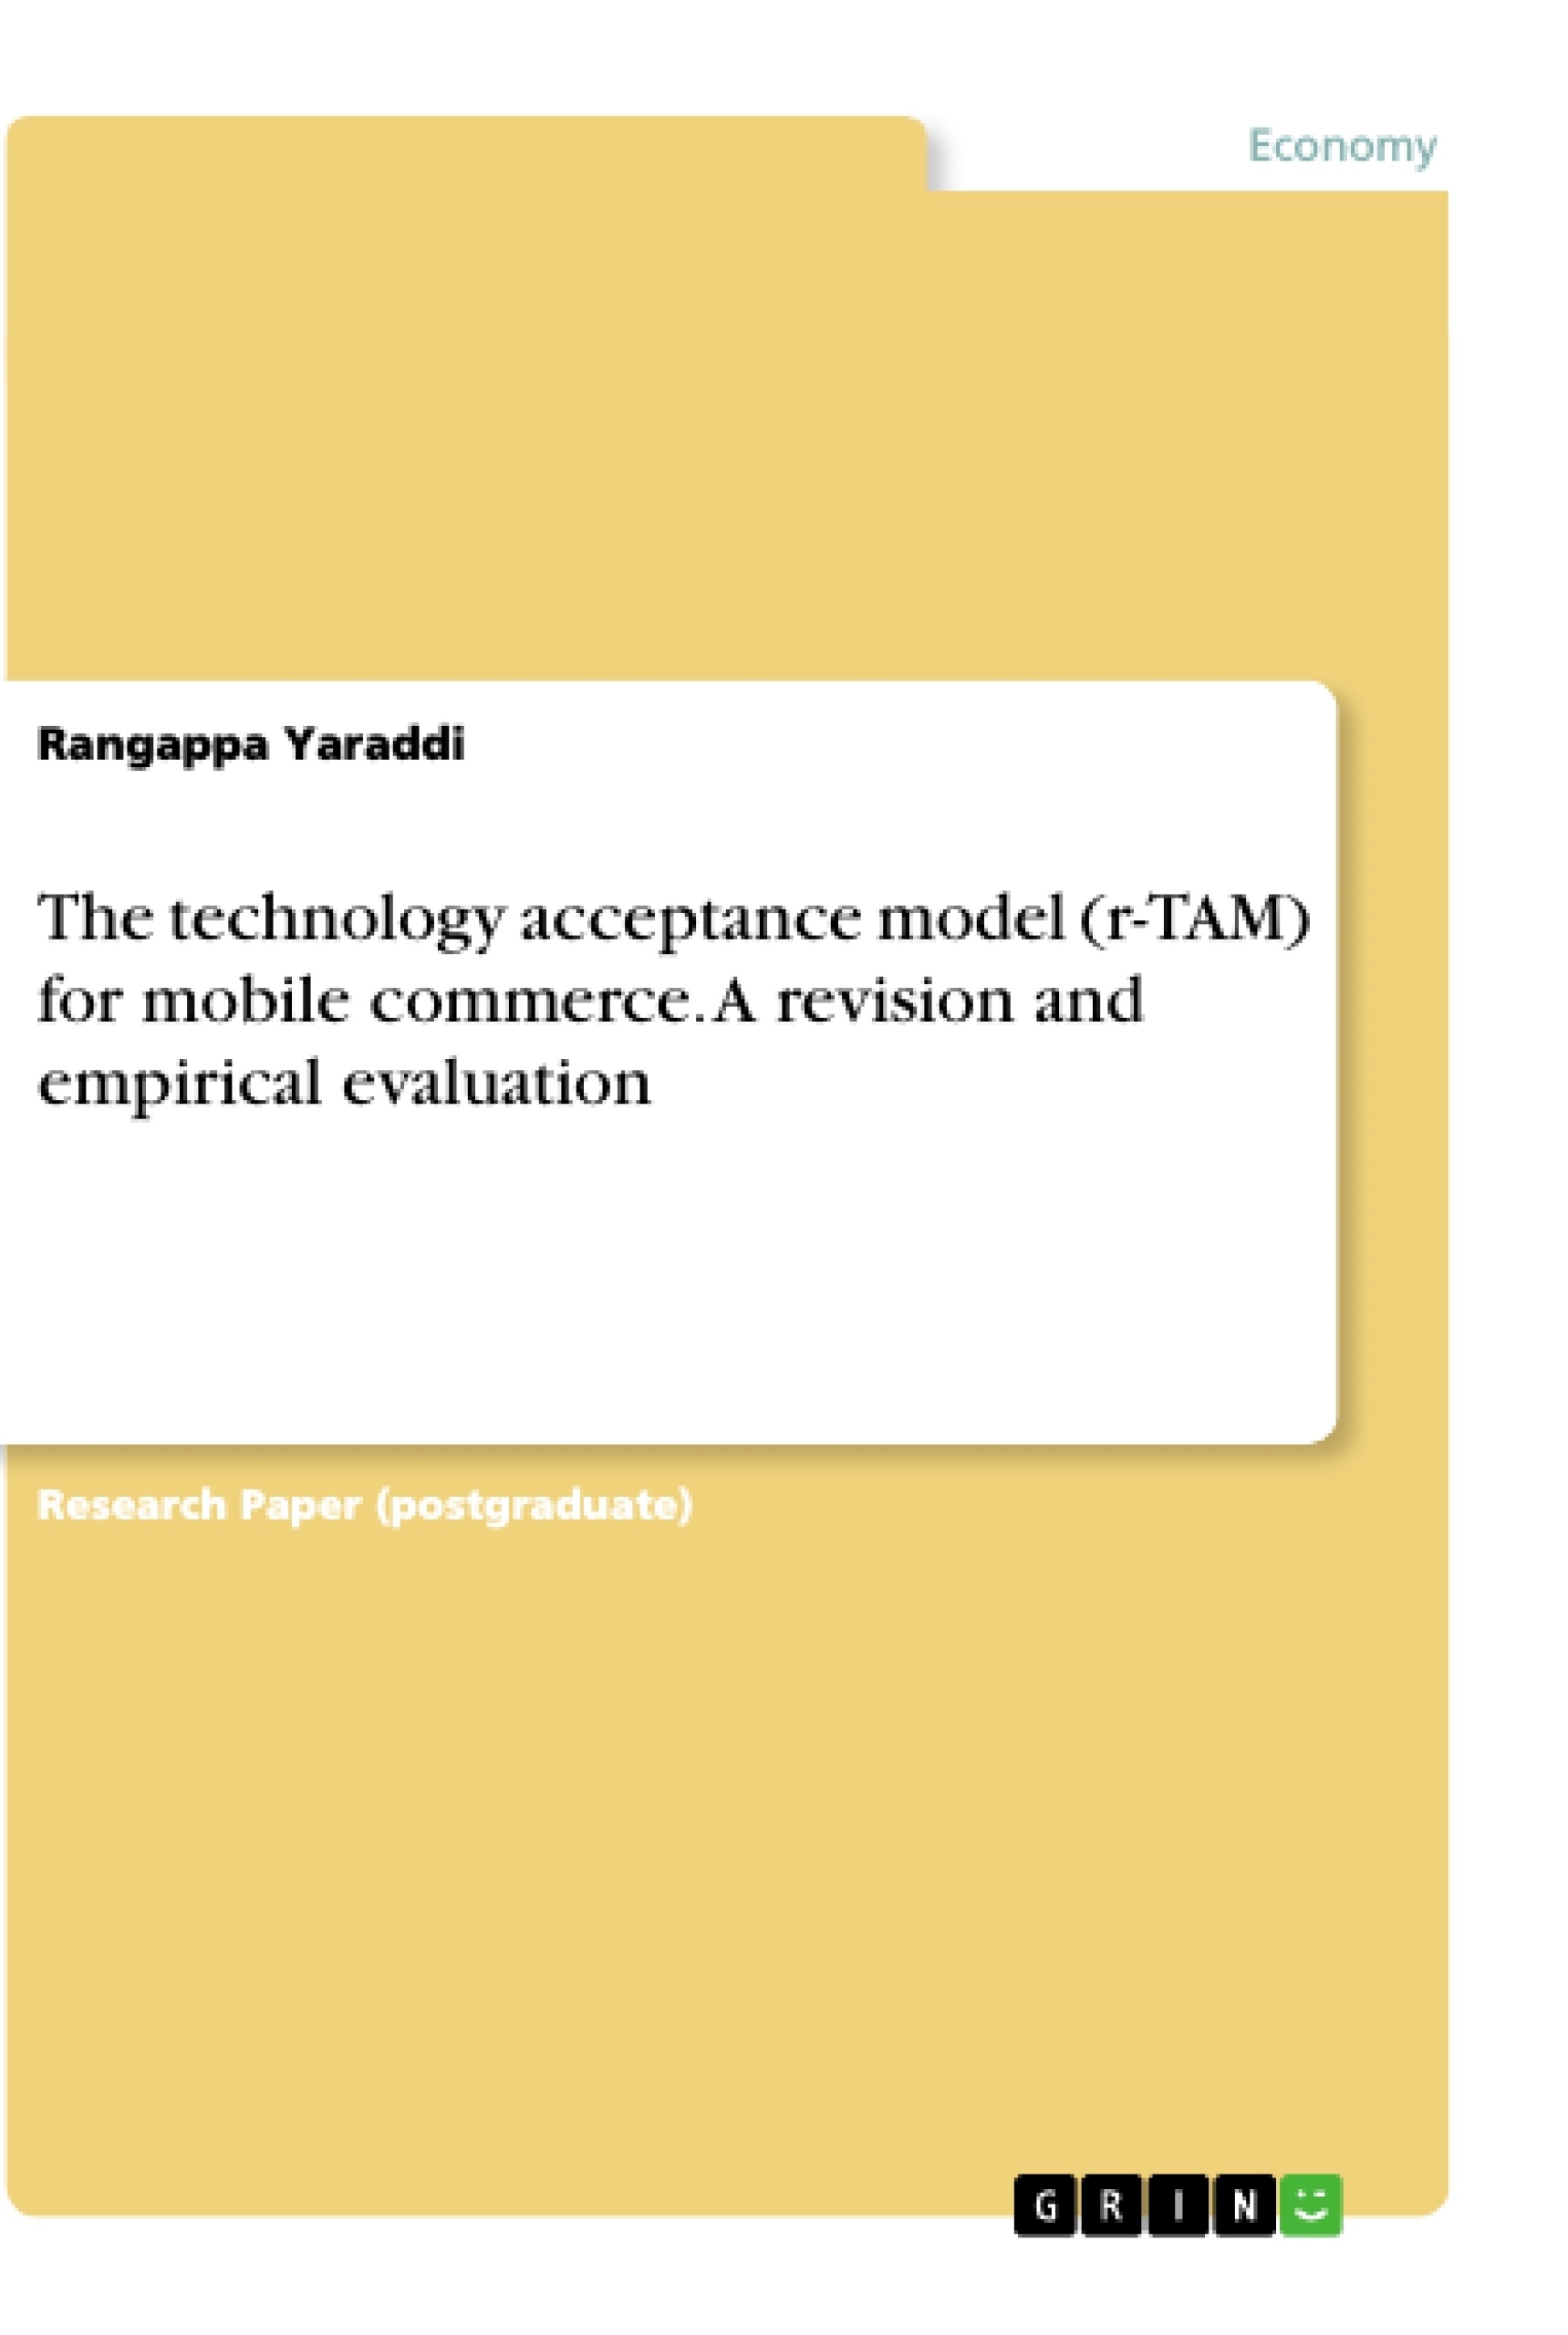 Title: The technology acceptance model (r-TAM) for mobile commerce. A revision and empirical evaluation